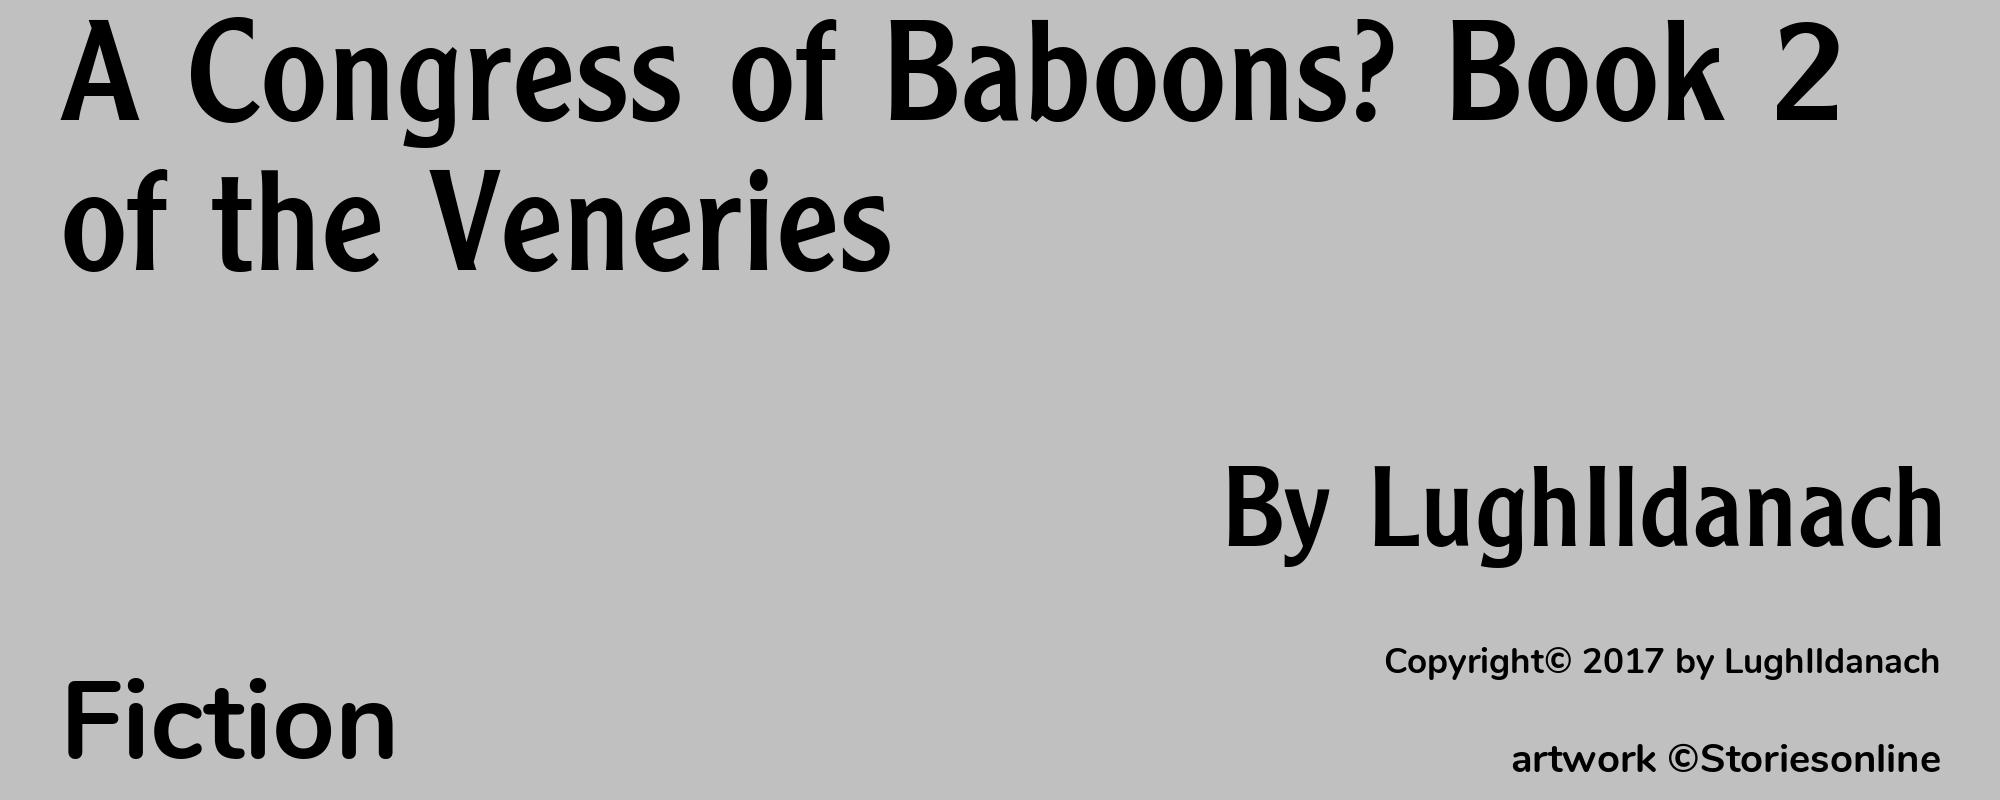 A Congress of Baboons? Book 2 of the Veneries - Cover